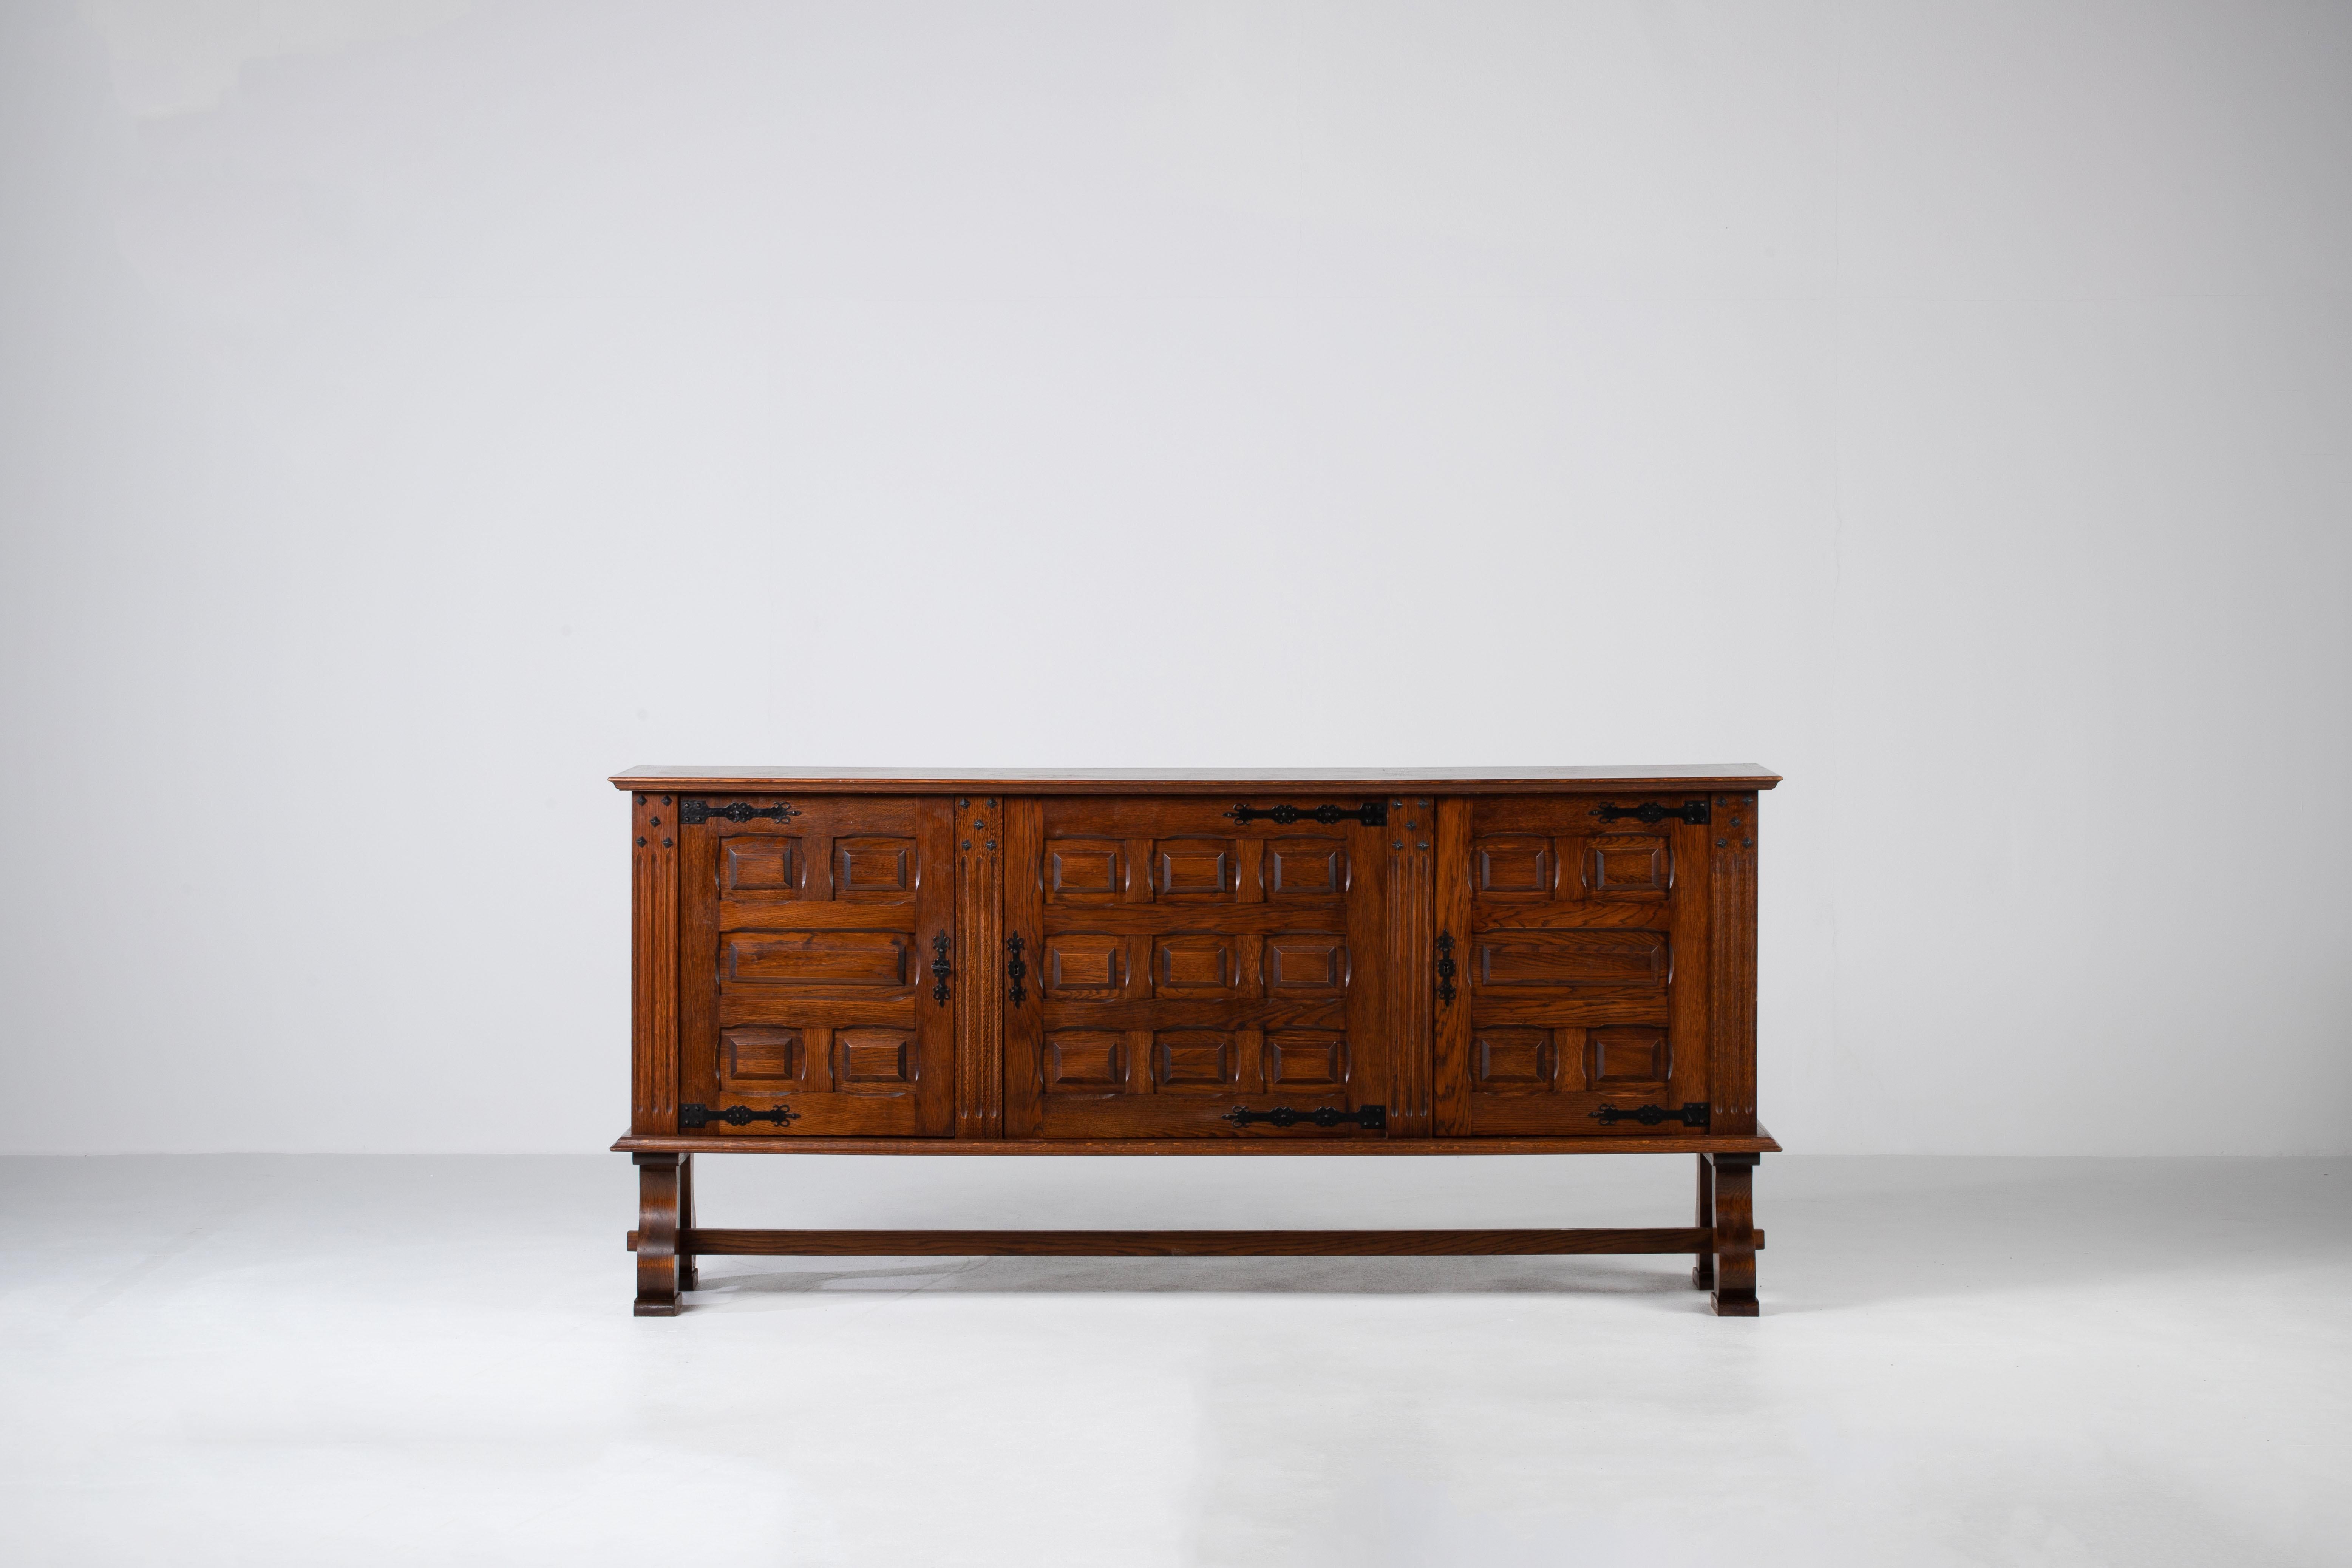 This characteristic cabinet, buffet in solid oak was inspired by the work of French designer duo Guillerme et Chambron or Charlotte Perriand.

Unearthed in a chic chalet in Gerardmer, this sideboard from the 60s offers an authentic and warm